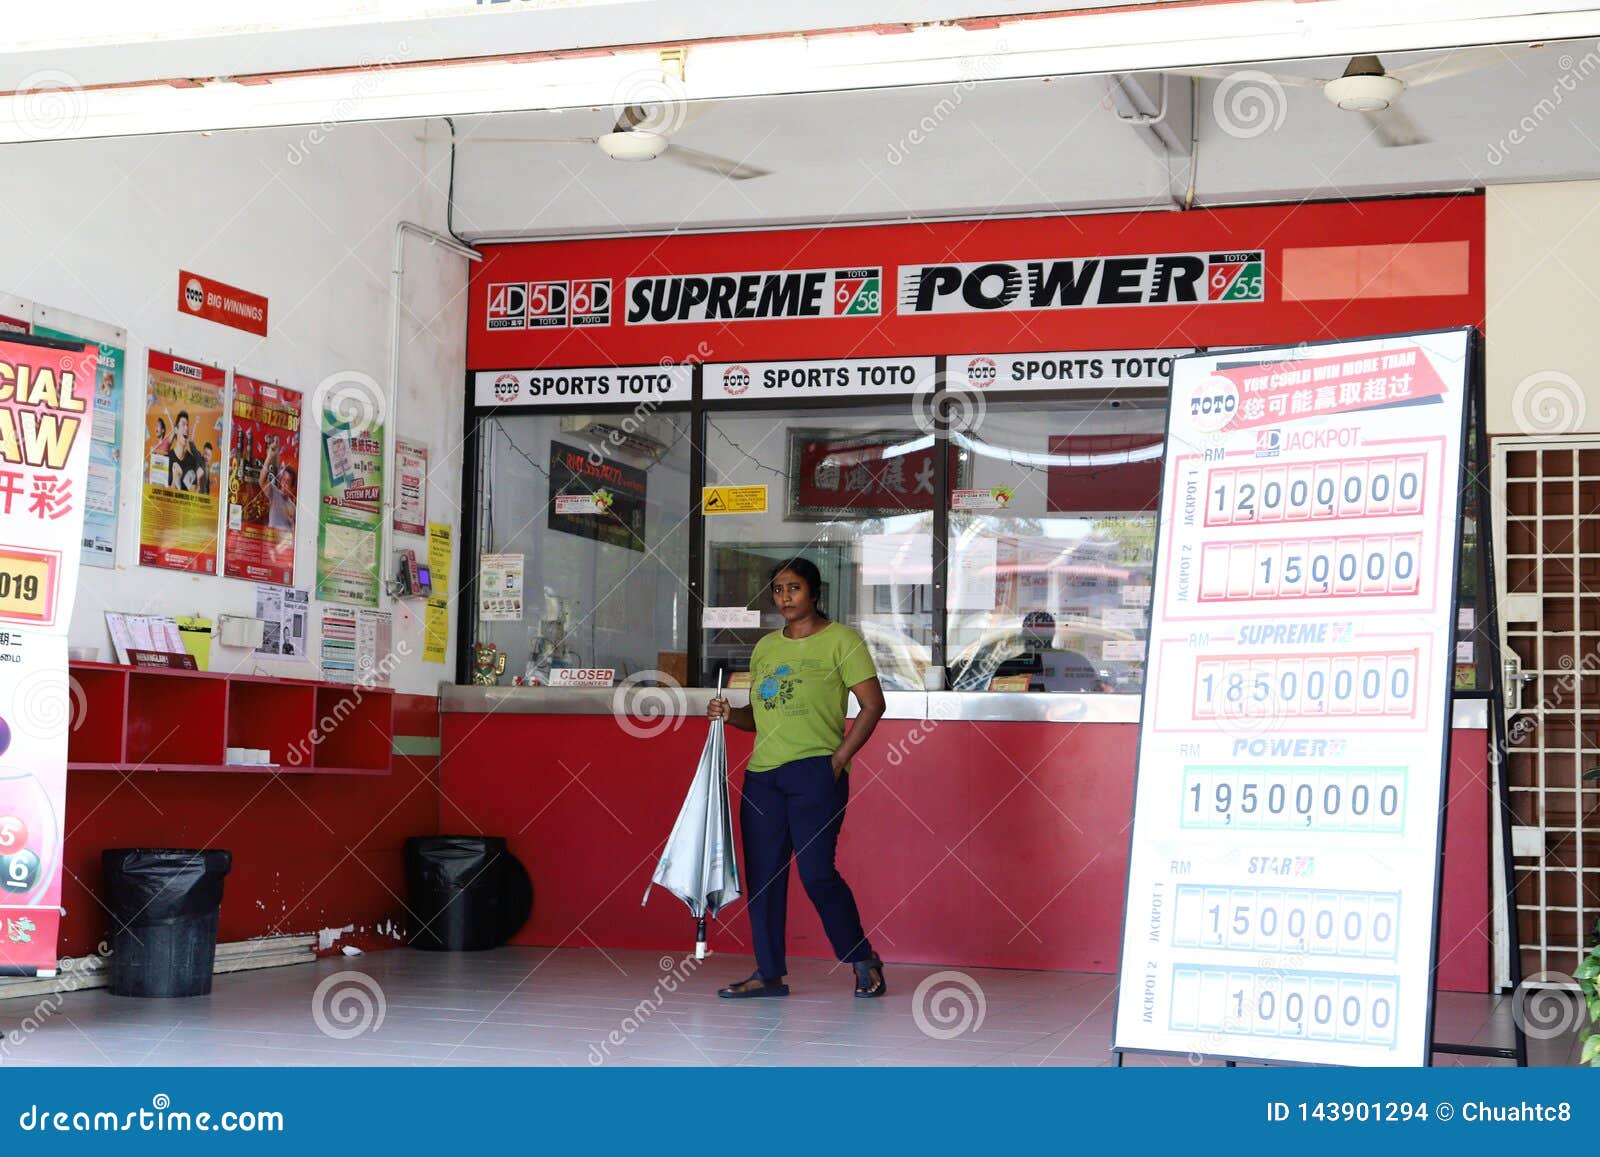 indian-lady-walking-out-sports-toto-outlet-ticket-counters-signboard-posters-berjaya-malaysia-143901294.jpg